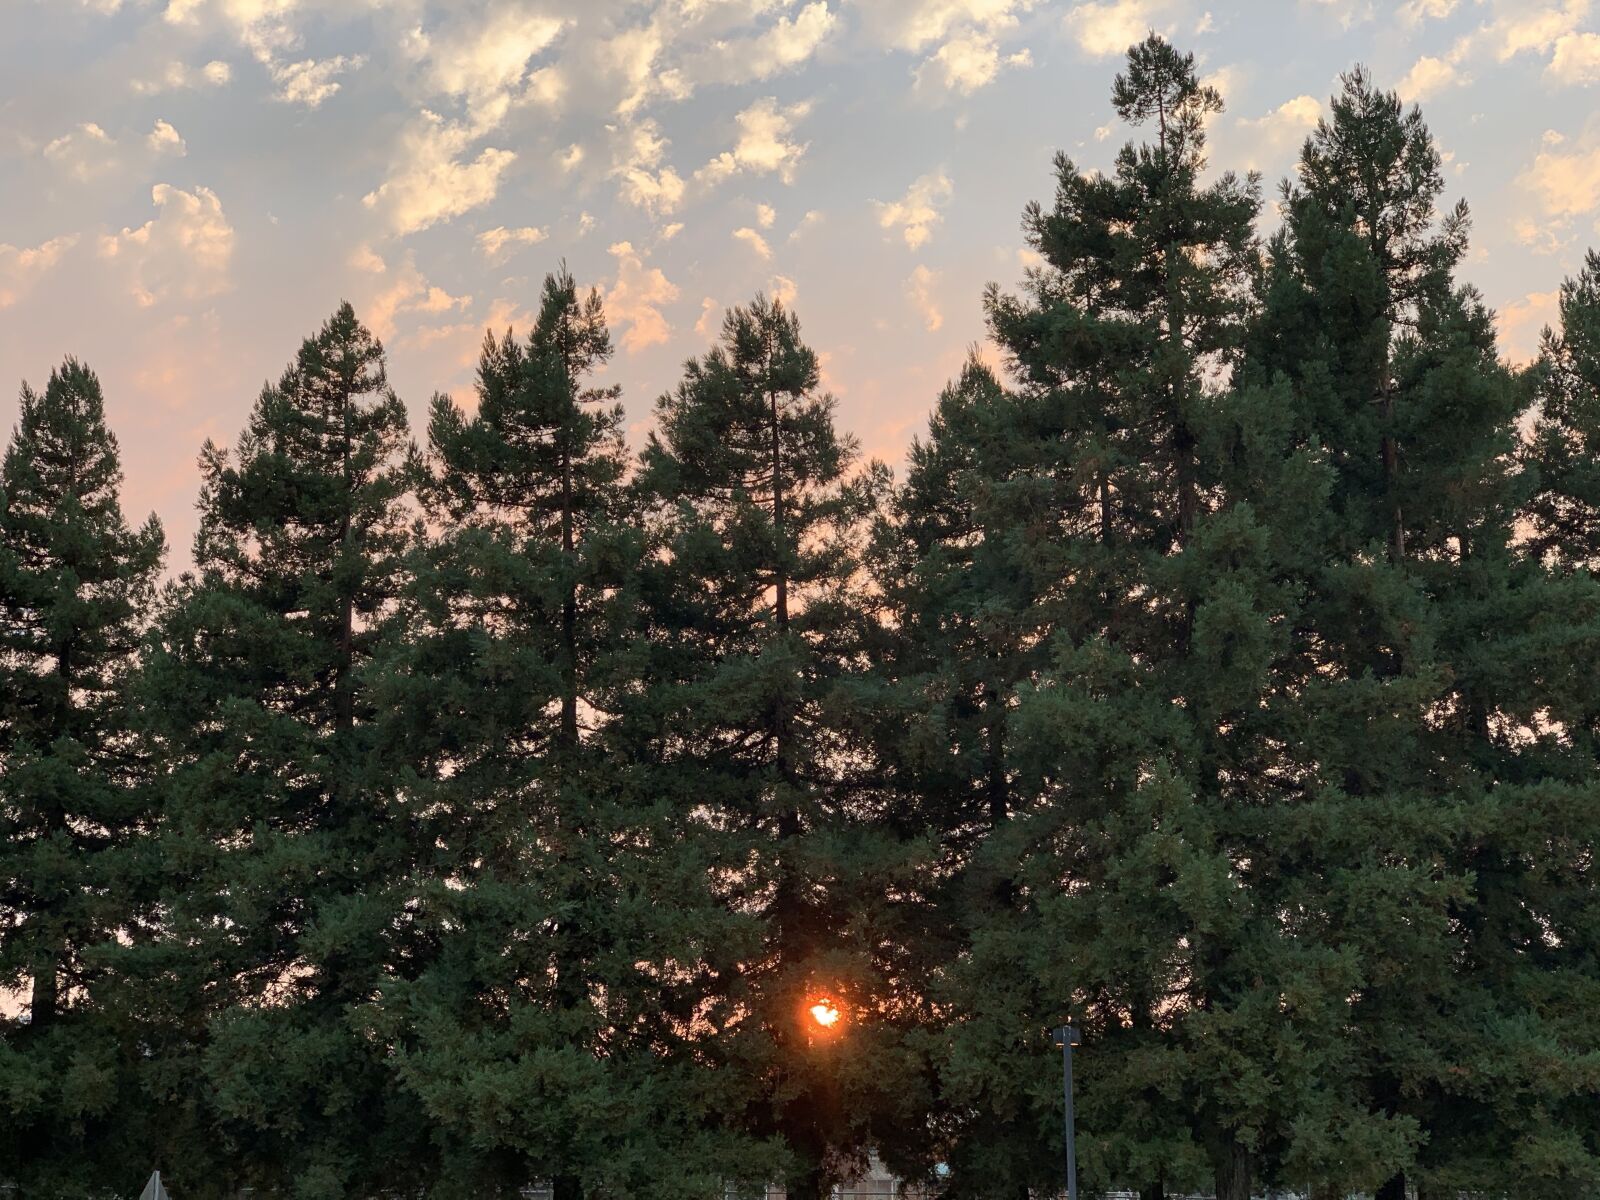 iPhone XS back dual camera 6mm f/2.4 sample photo. Sunset, trees, clouds photography